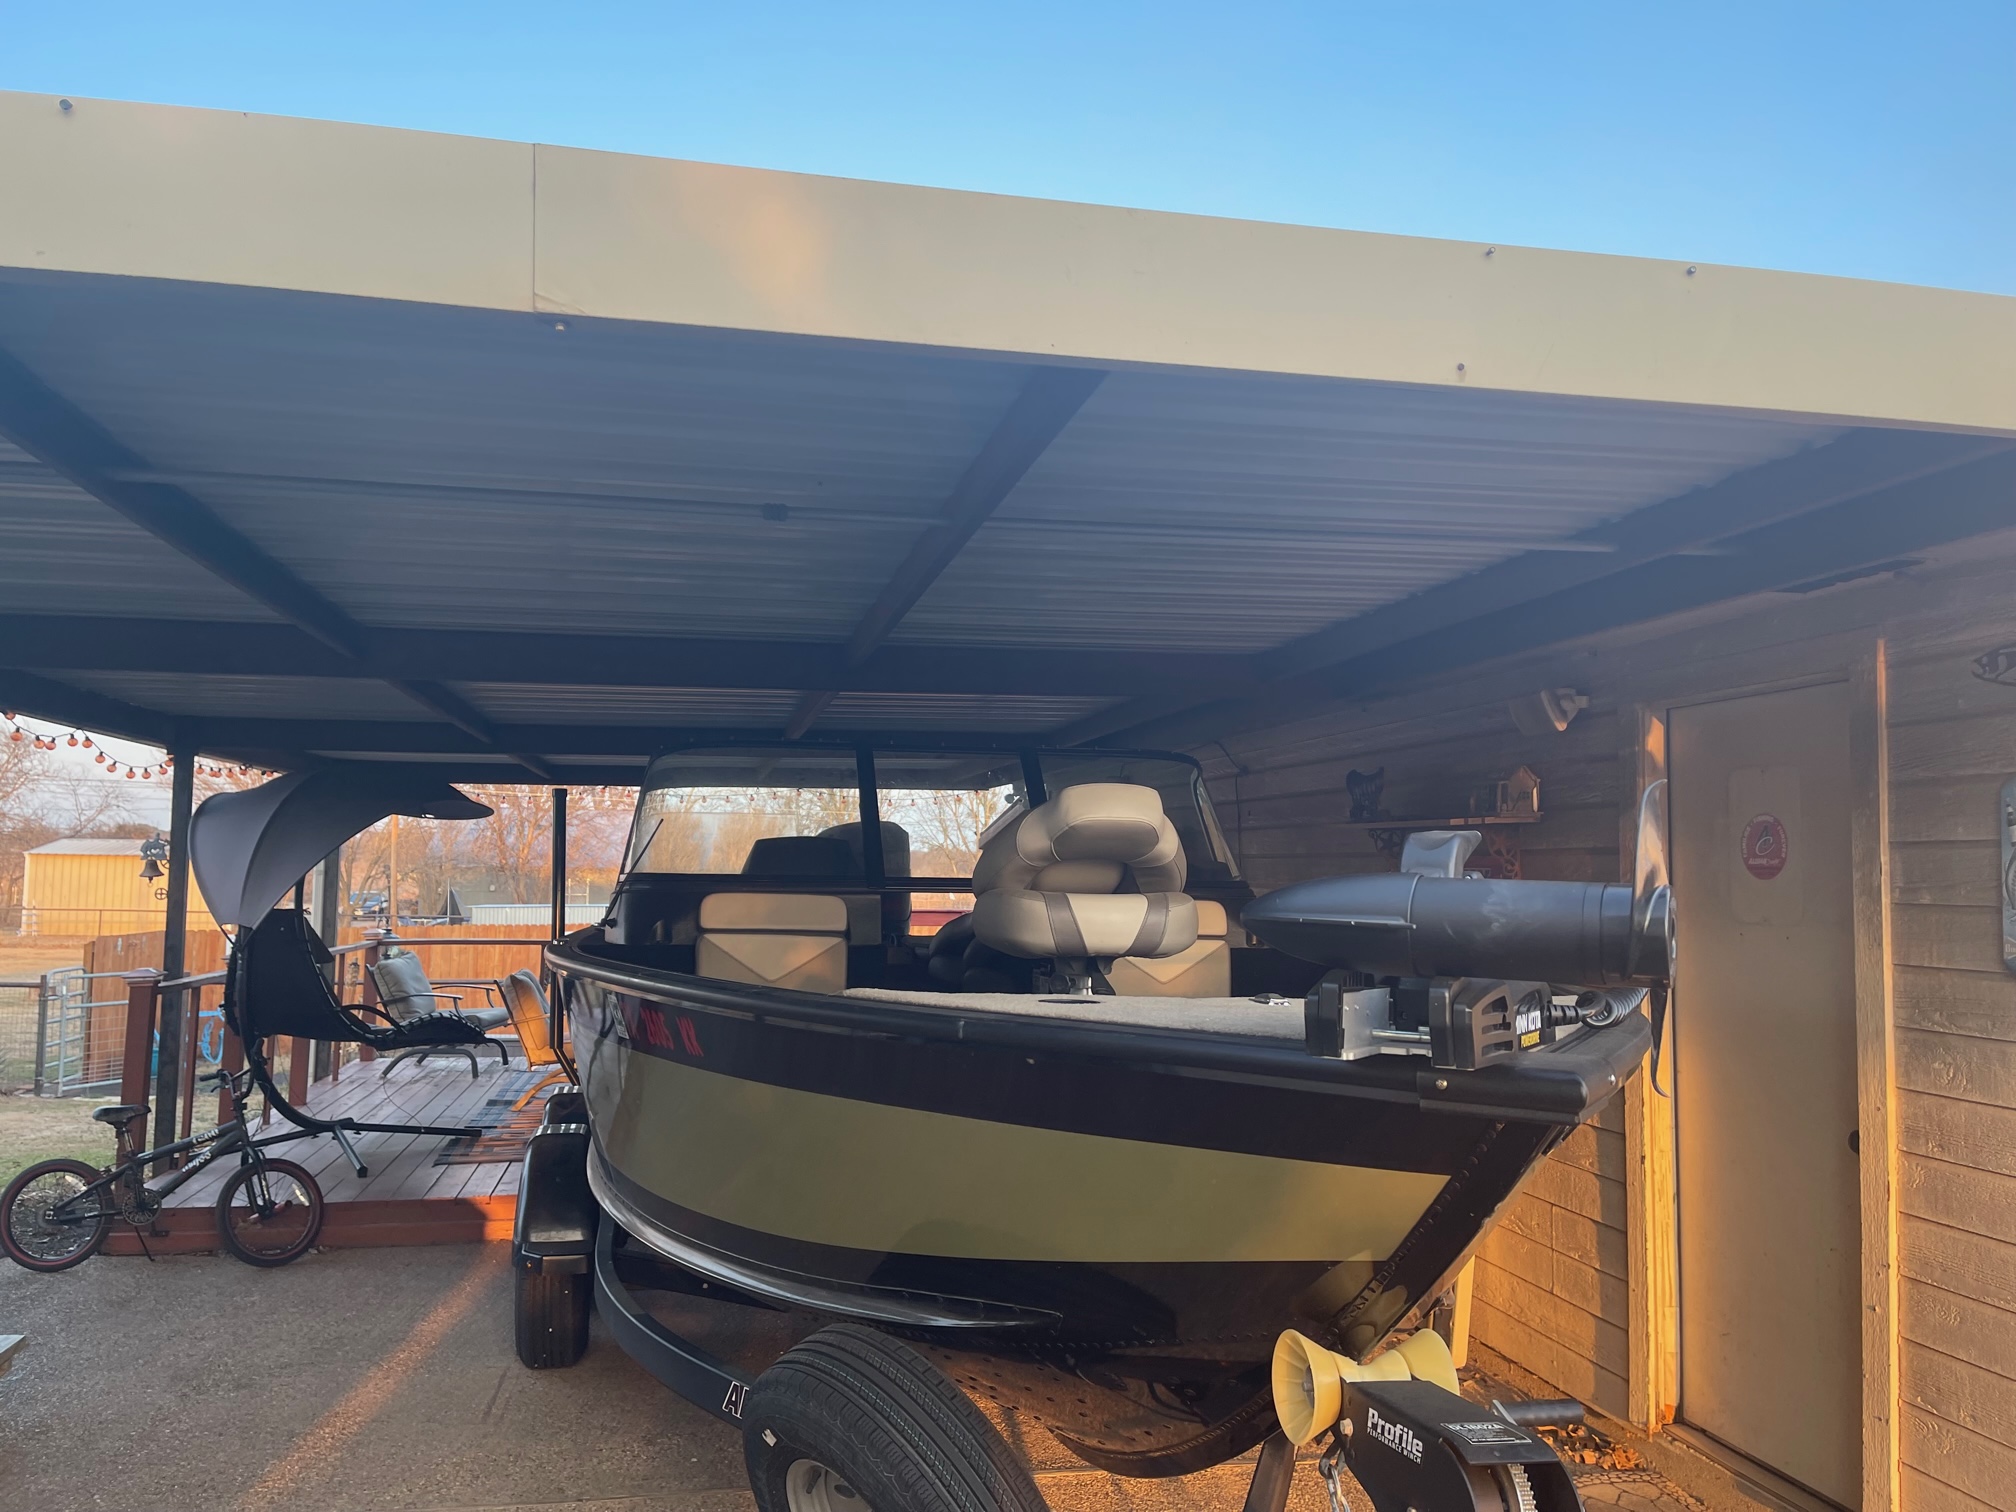 2020 Alumacraft 205 Competitor Power boat for sale in Waco, TX - image 18 